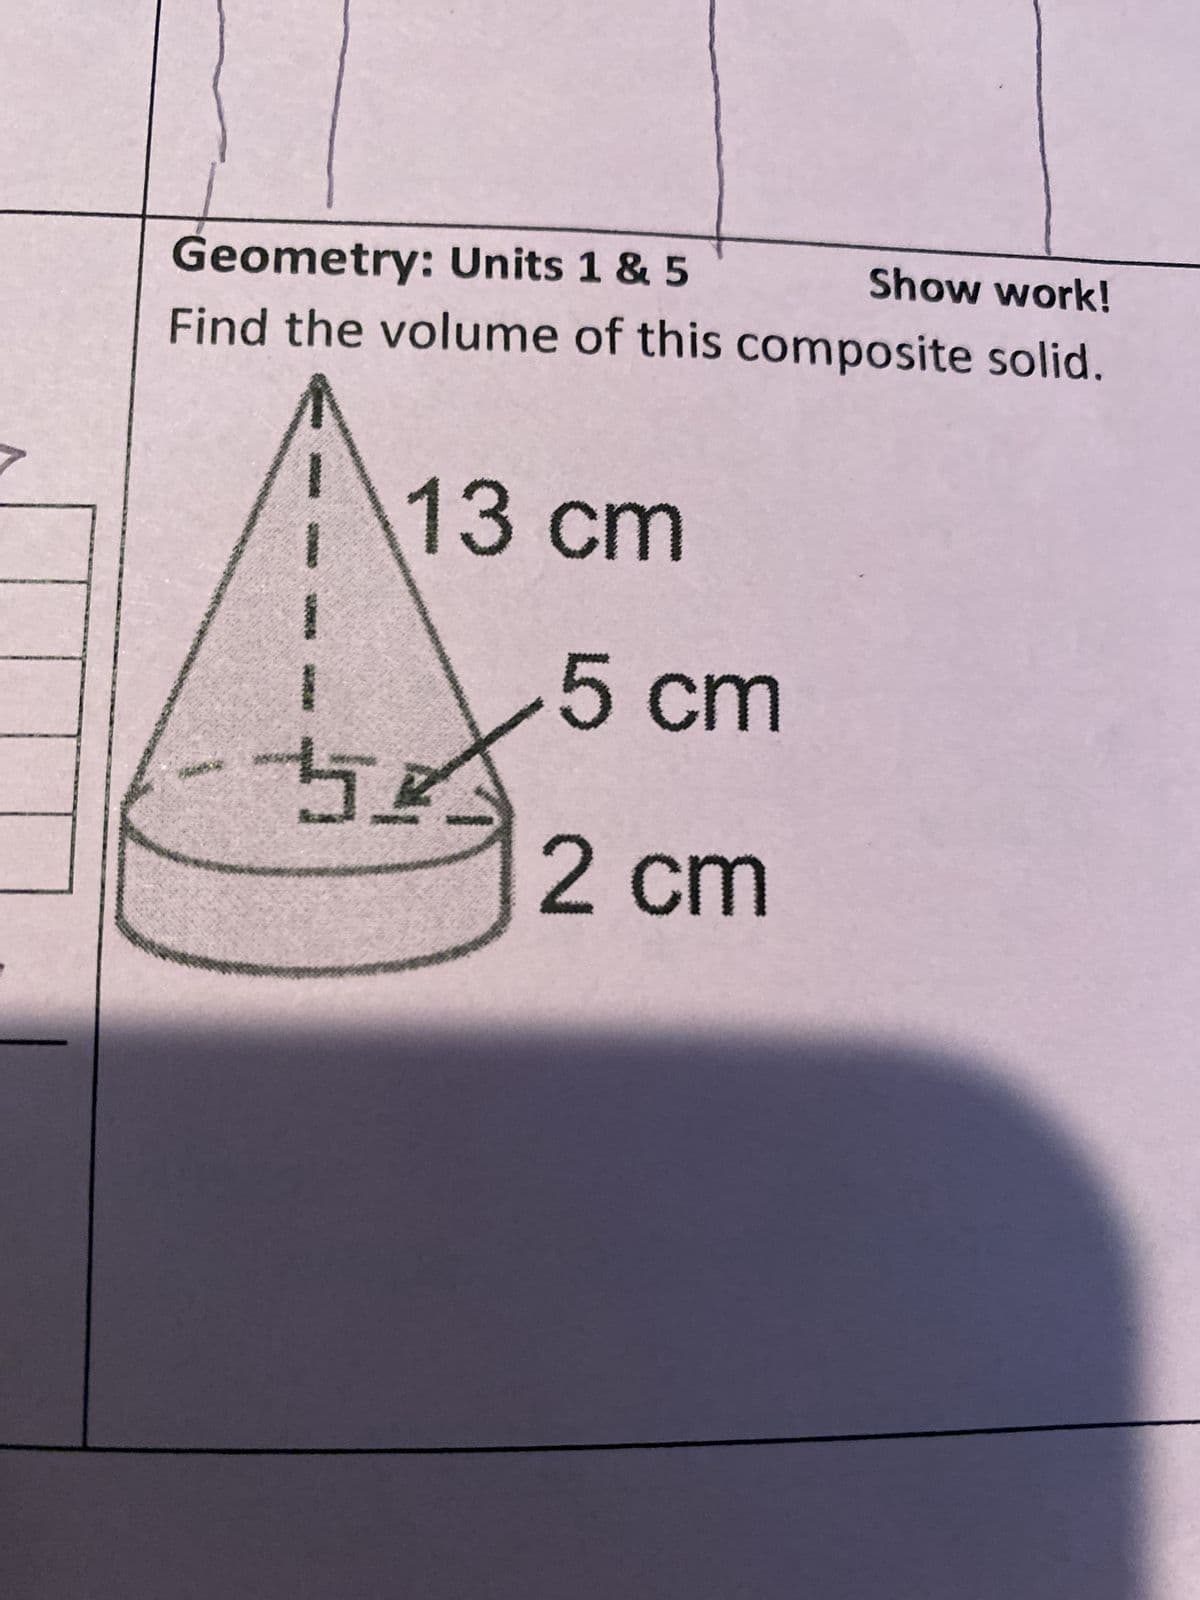 Geometry: Units 1 & 5
Show work!
Find the volume of this composite solid.
13 cm
古玲
5 cm
2 cm